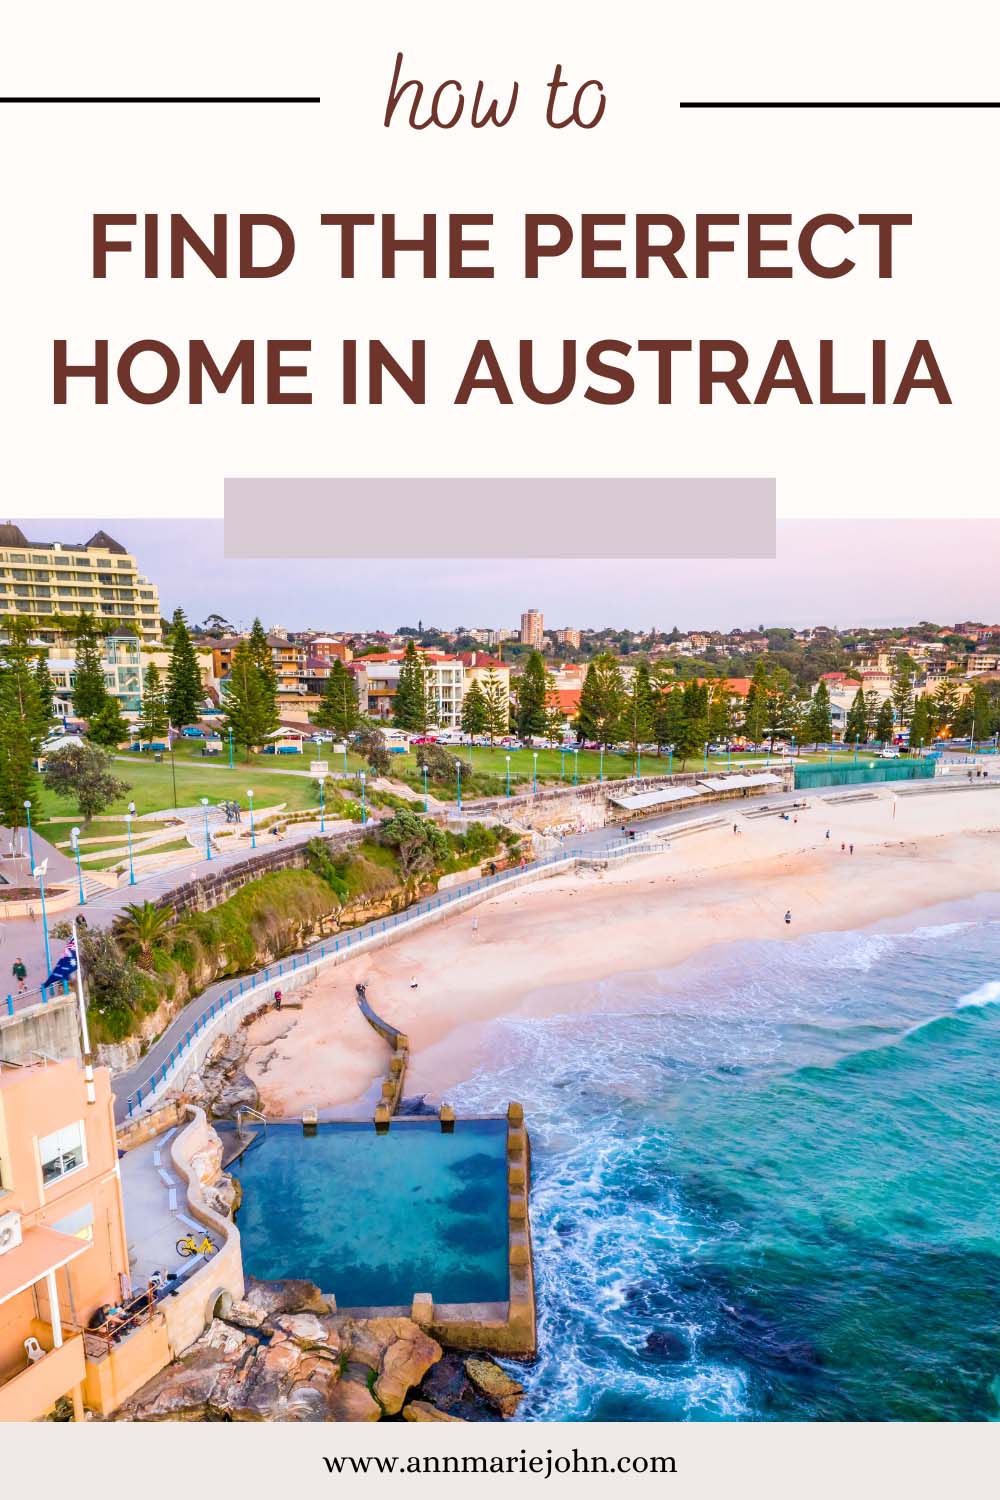 How to find the perfect home in Australia